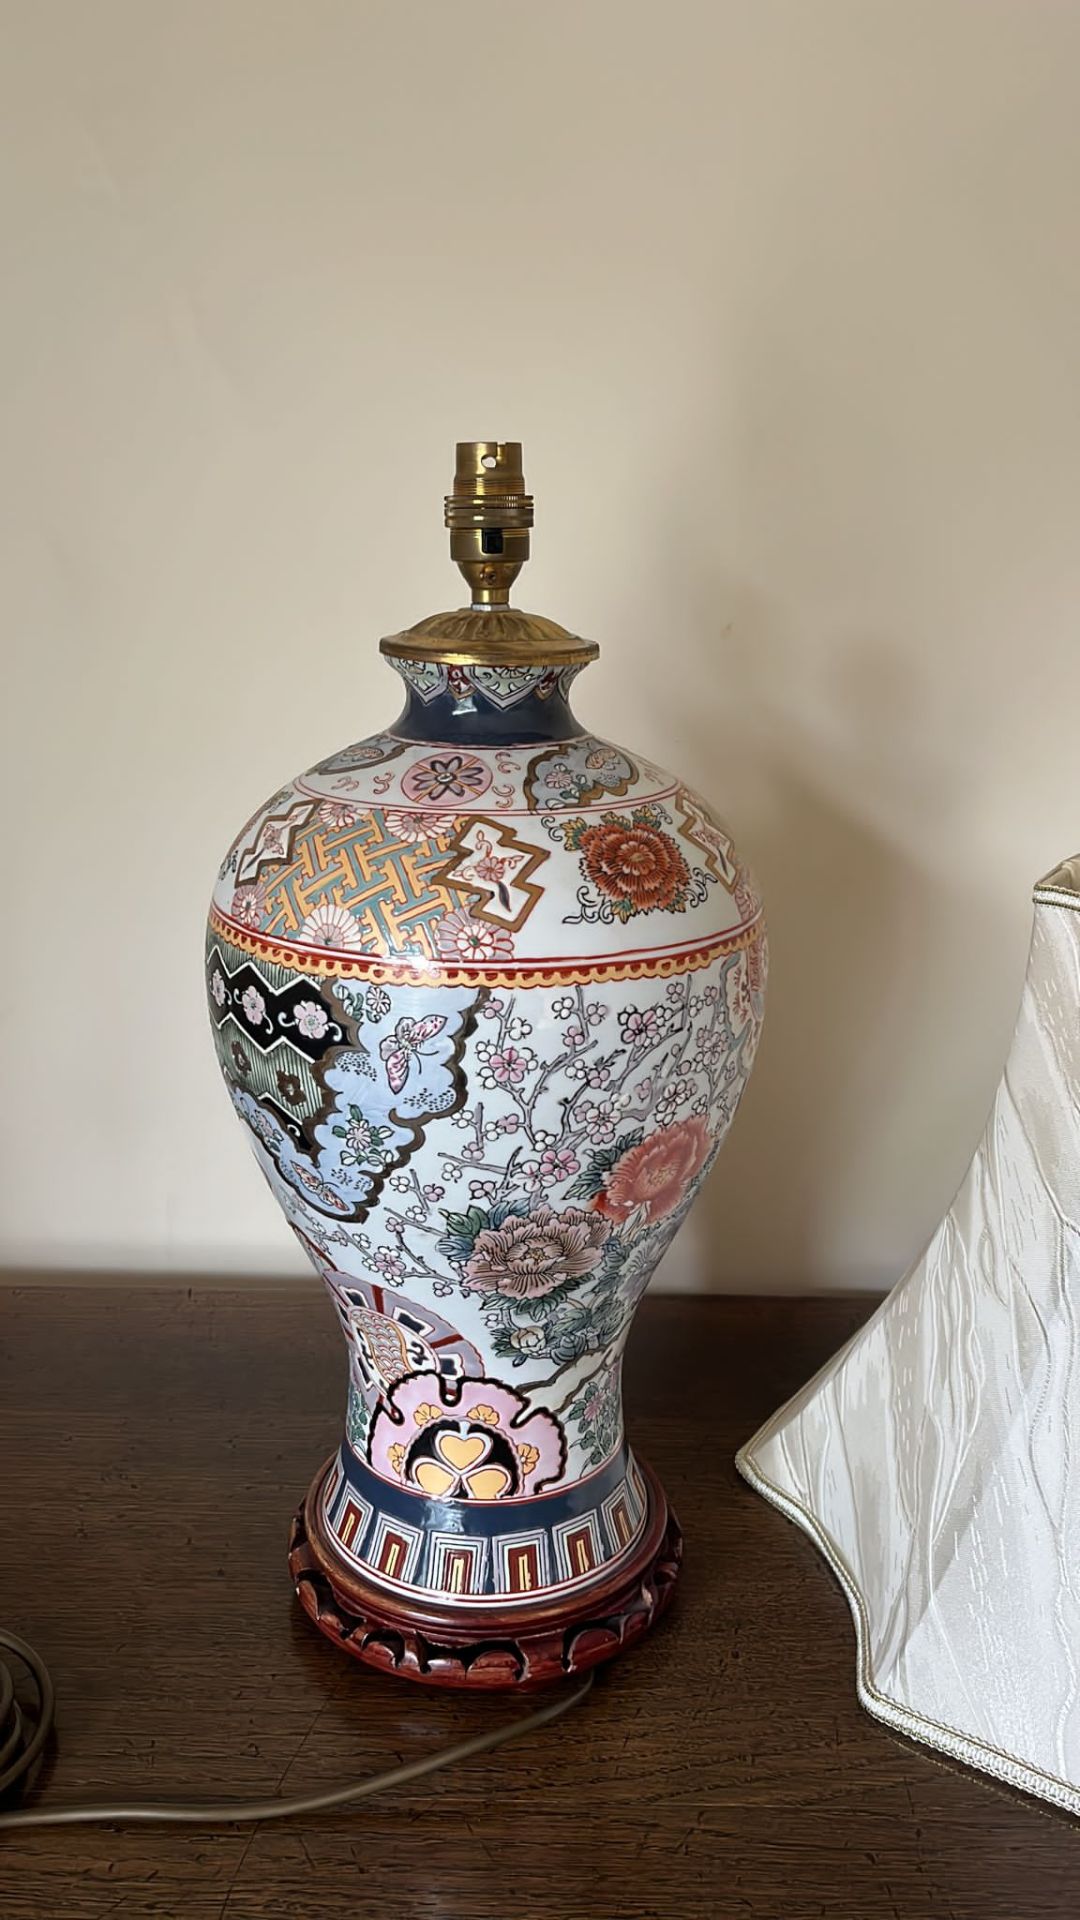 A CHINESE ENAMEL DESIGN TABLE LAMP WITH GEOMETRIC AND FLORAL DESIGNS, ON CARVED WOODEN BASE AND - Image 4 of 5